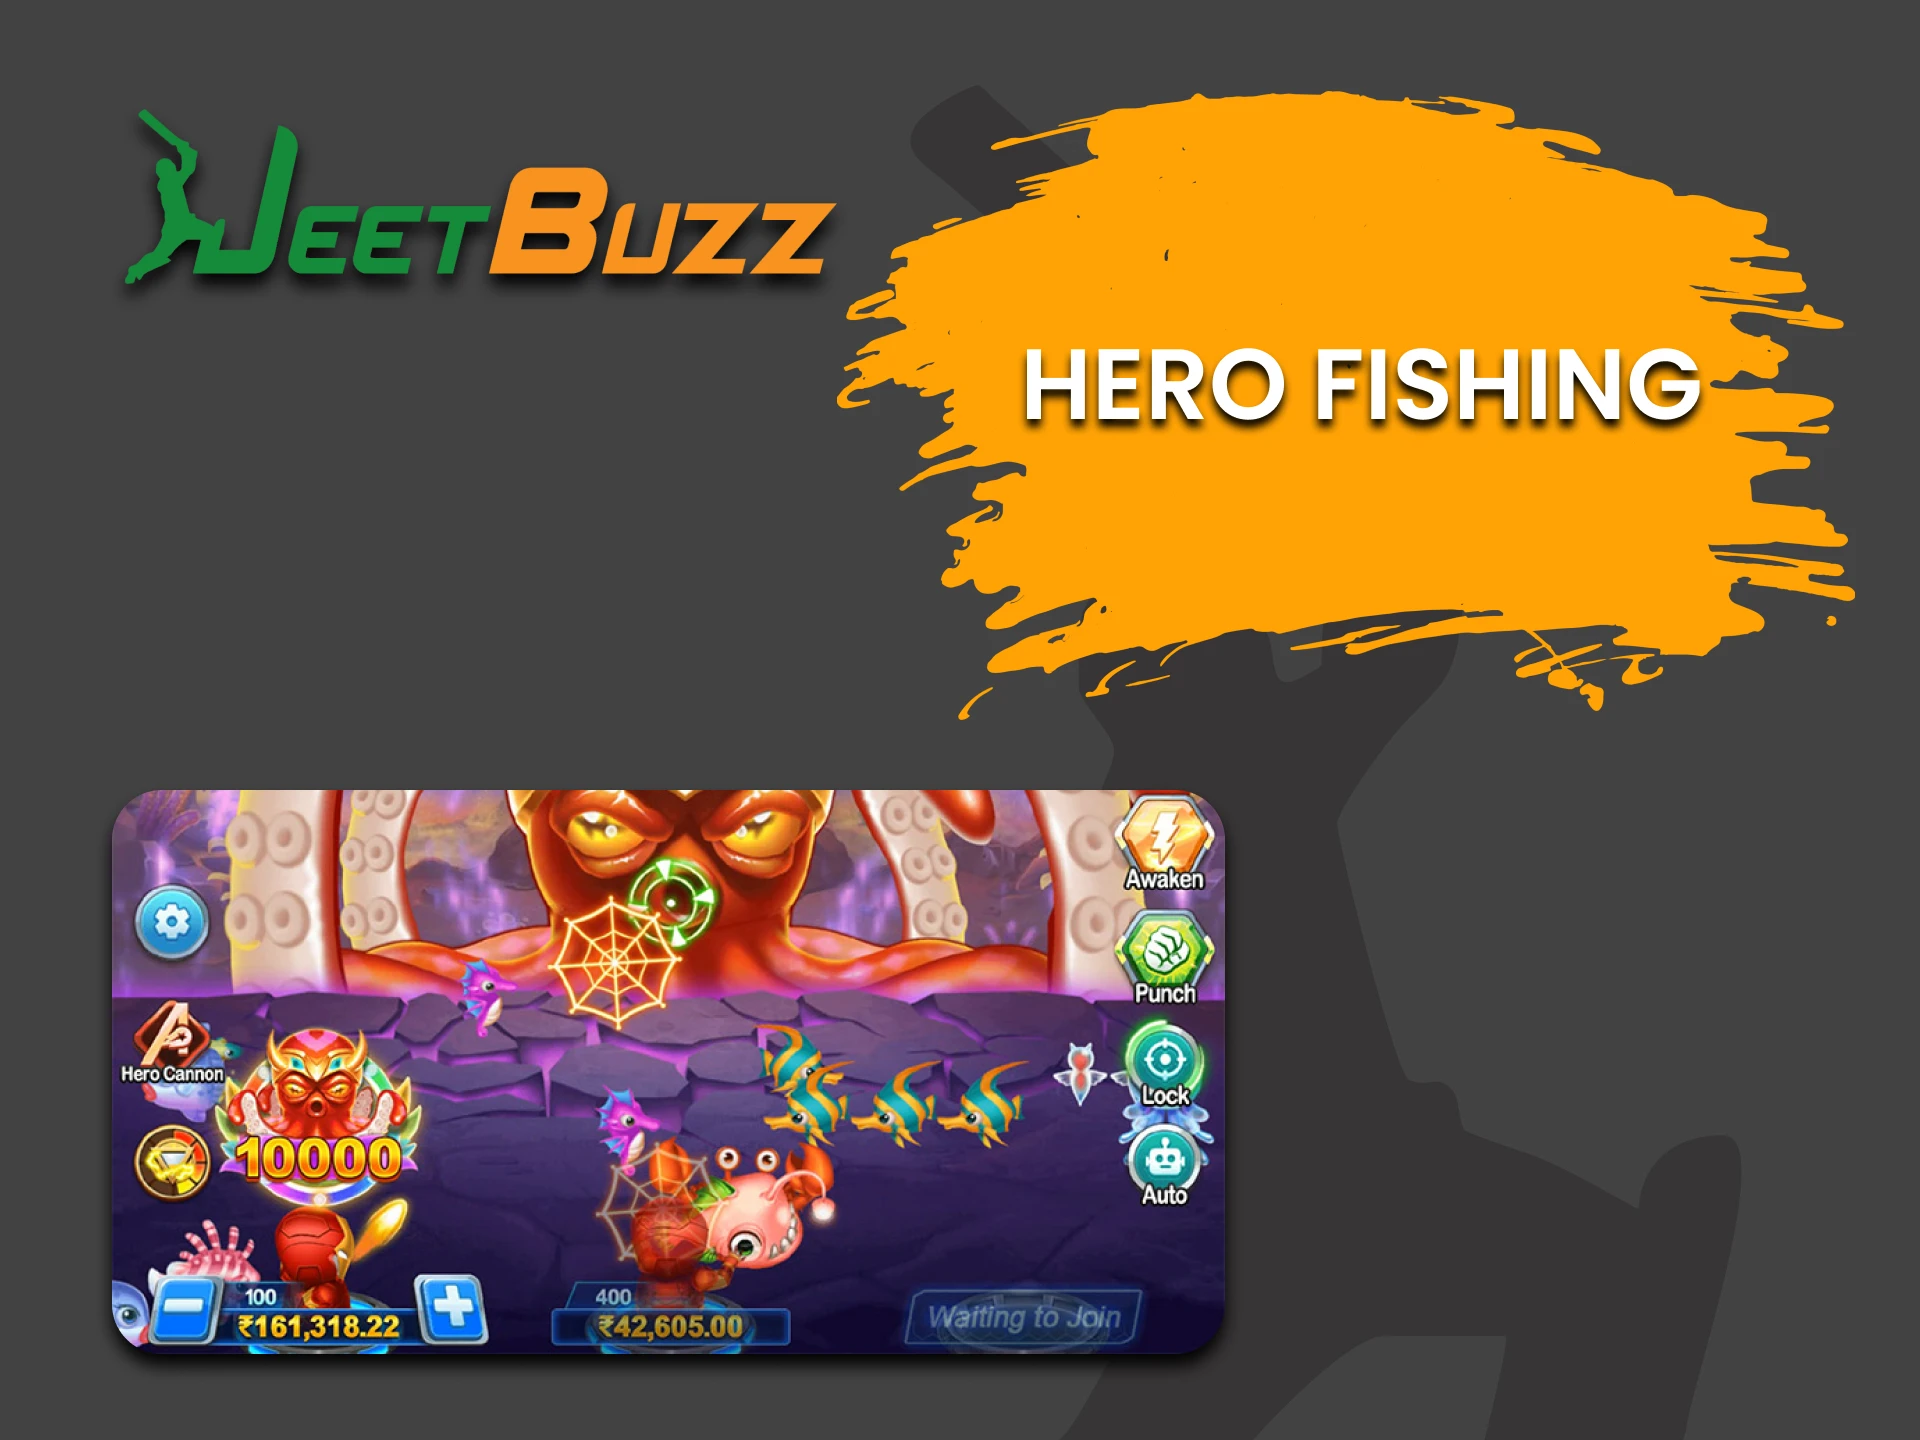 Try your hand at Hero Fishing on JeetBuzz.